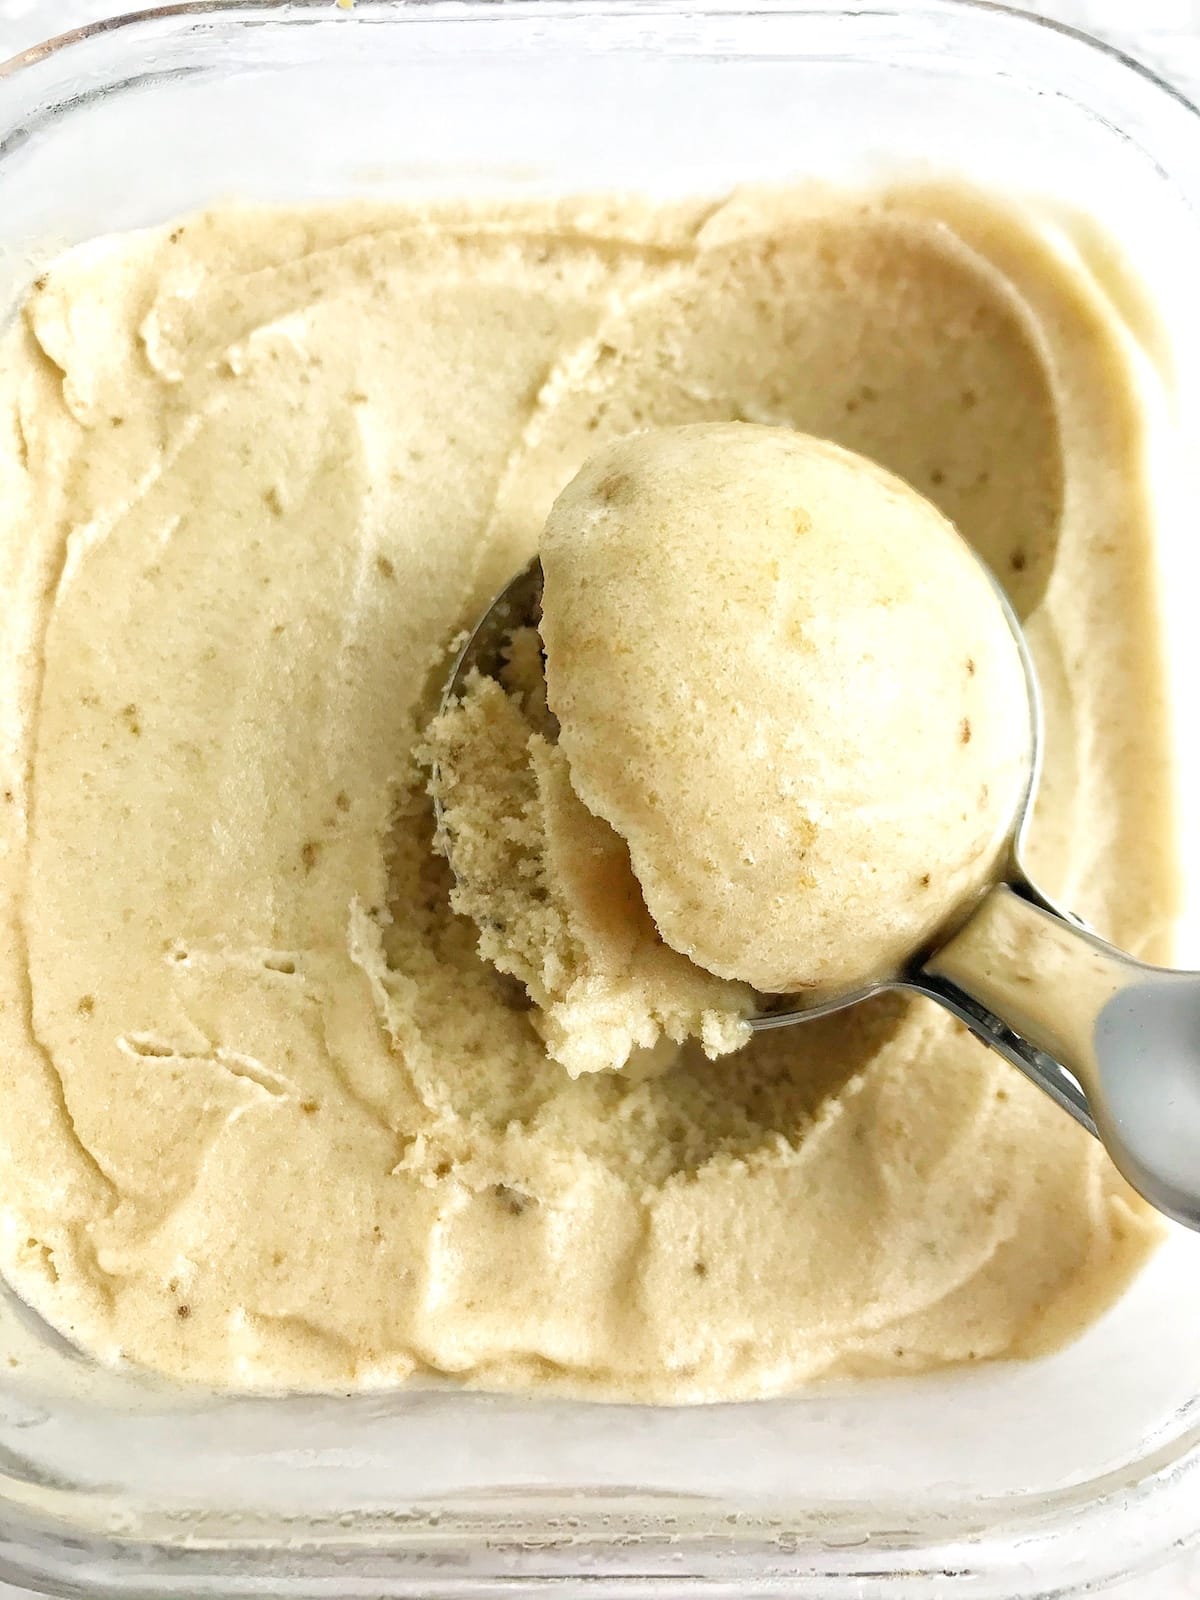 A scoop being taken from a contain of frozen banana nice cream.